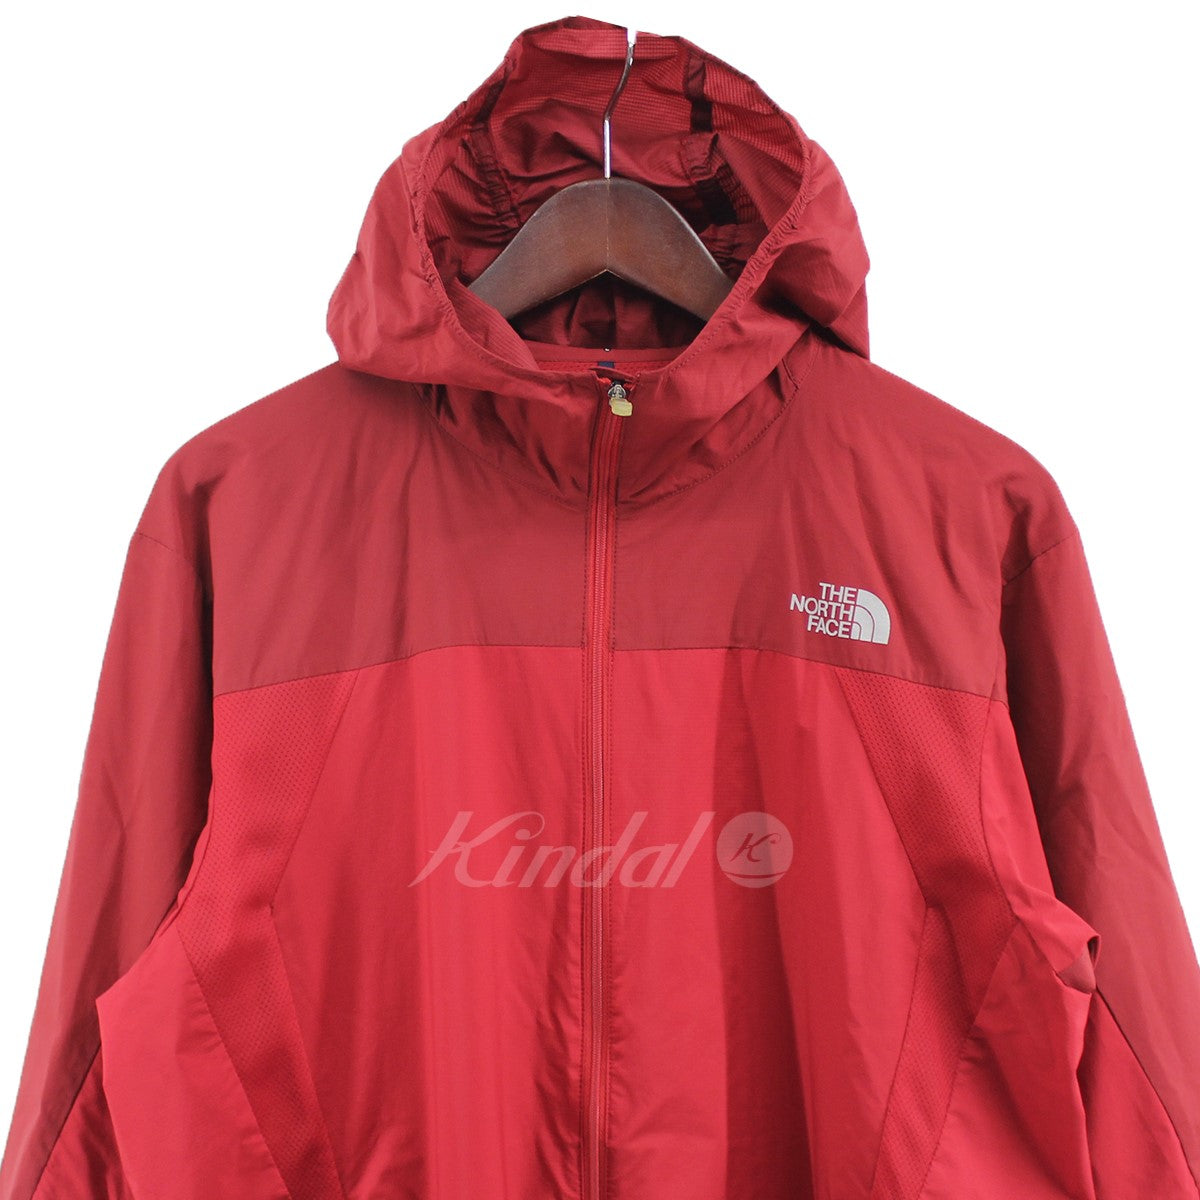 THE NORTH FACE(ザノースフェイス) Swallowtail Vent Hoodie スワロー ...